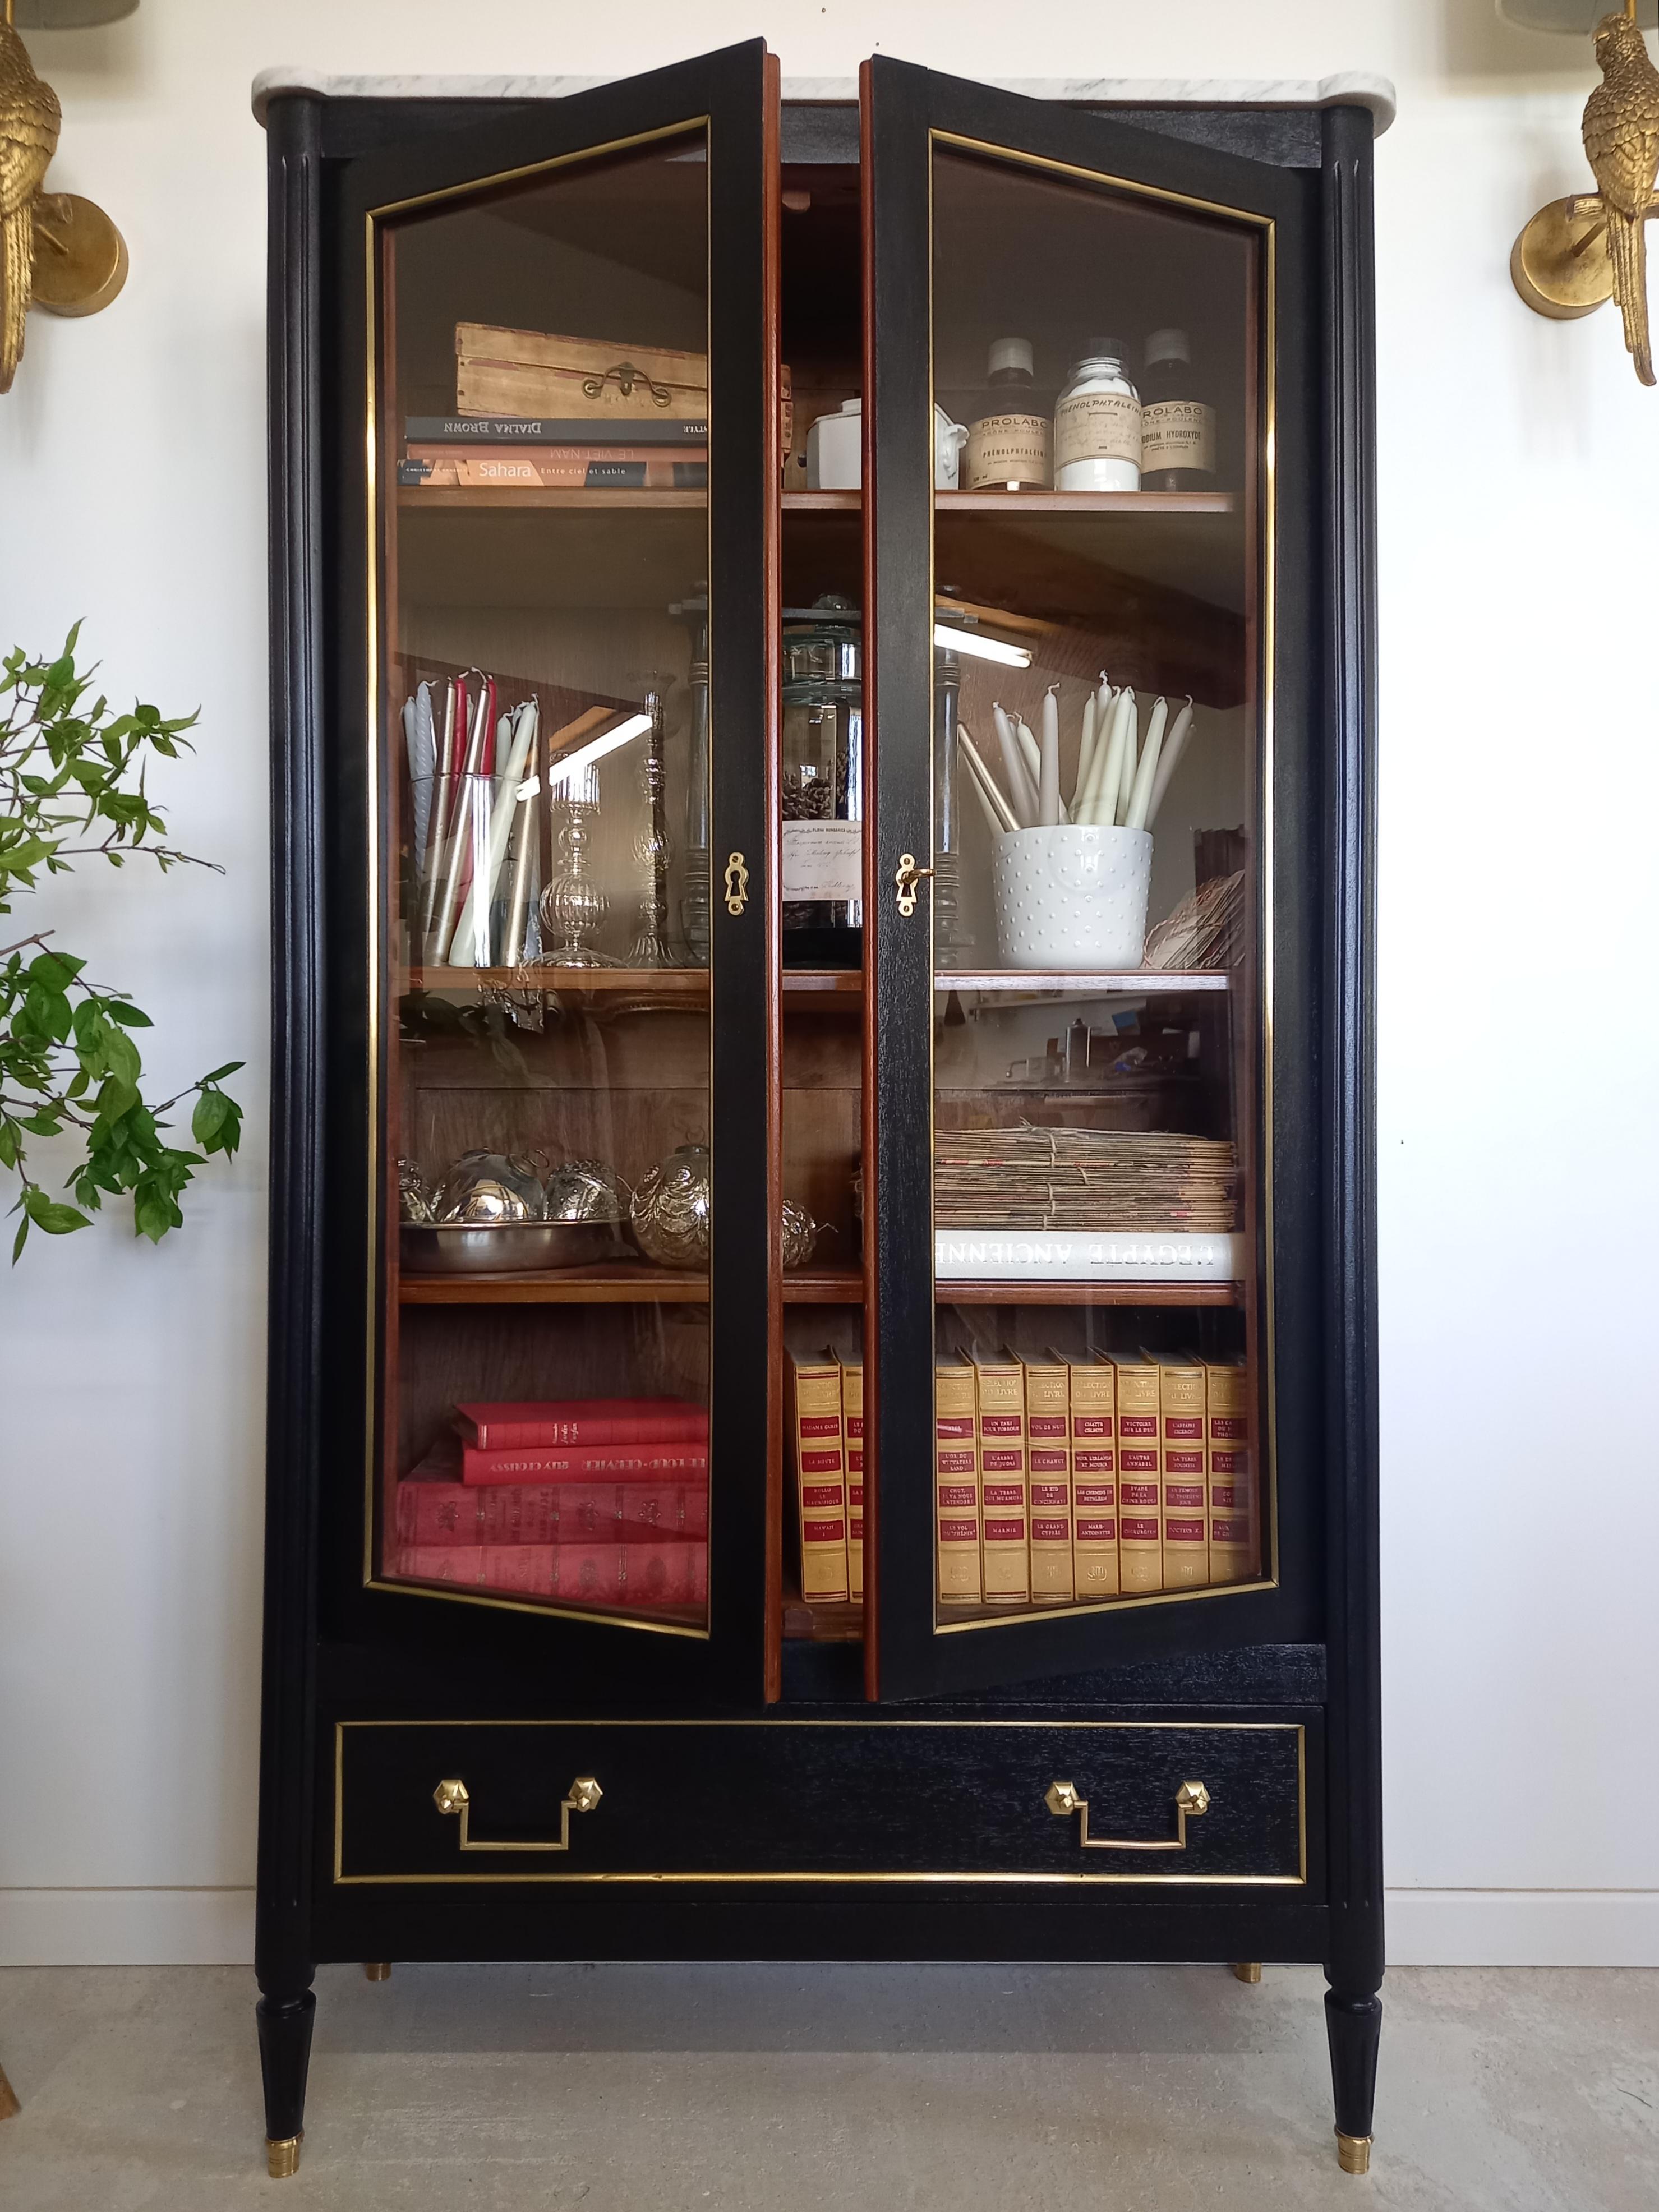 French bookcase vitrine buffet bar Louis XVI style, topped with a white Carrara marble, elegantly decorated by gilt brass elements.
Two glazed doors, fluted legs finished with golden bronze clogs.
The shelves are adjustable in height, it is